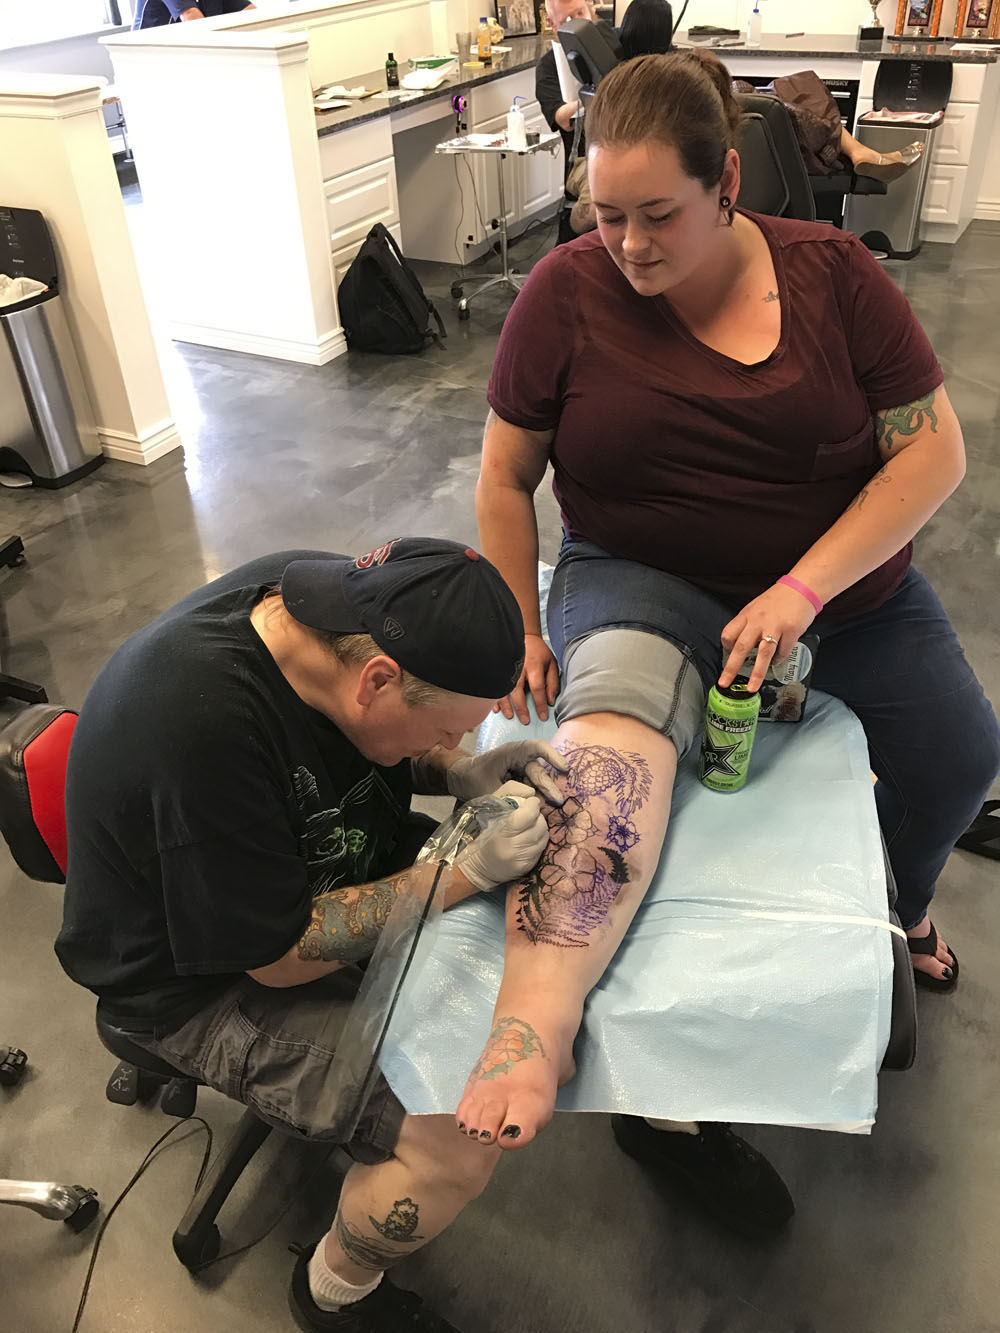 Lasercare Tattoo Removal